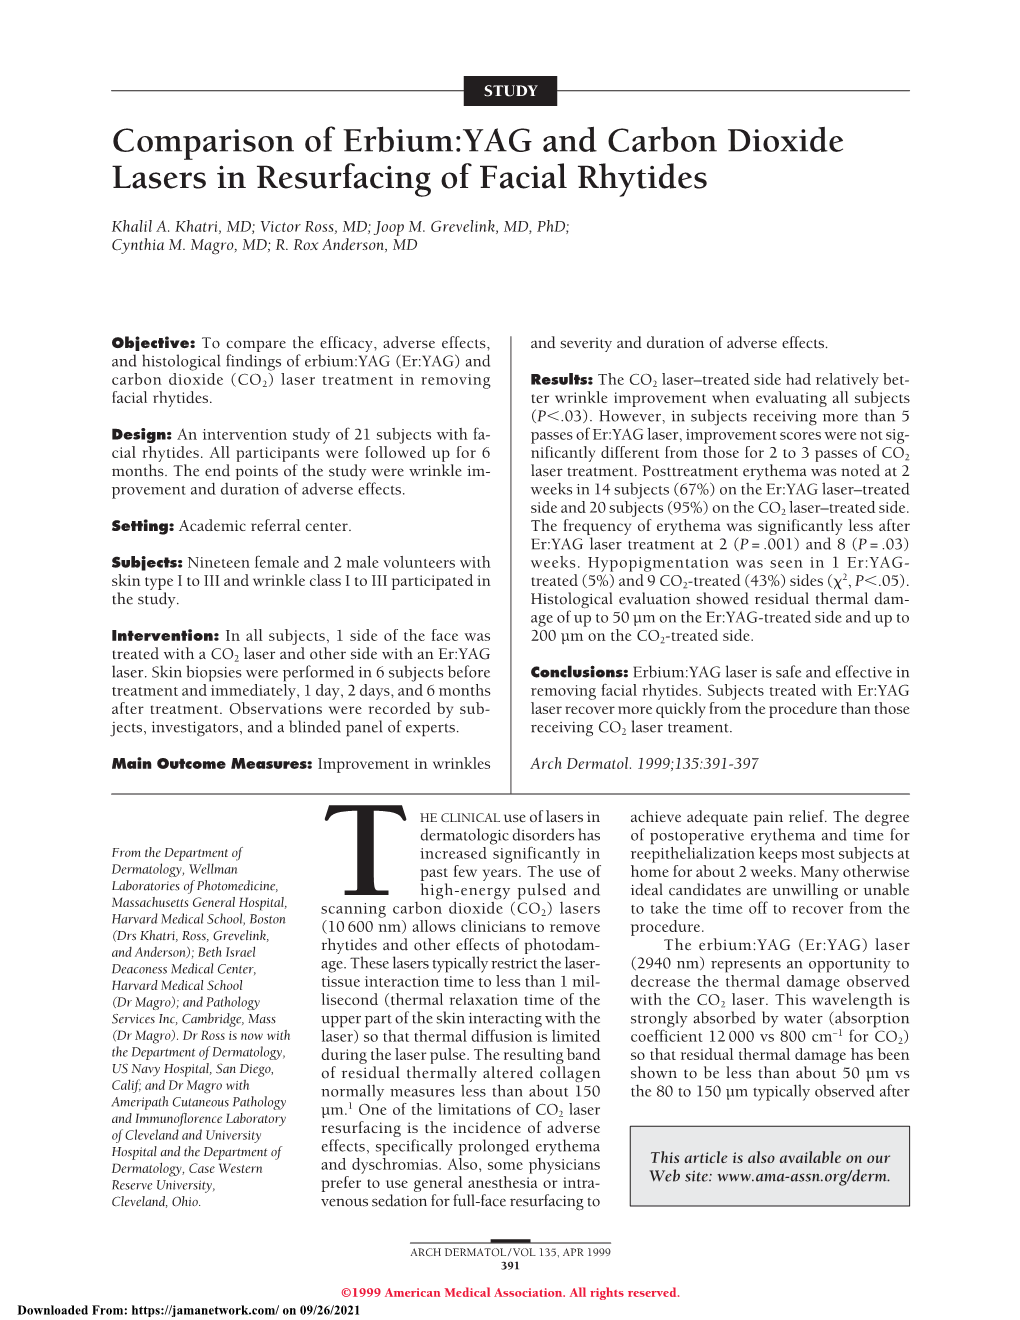 Comparison of Erbium:YAG and Carbon Dioxide Lasers in Resurfacing of Facial Rhytides